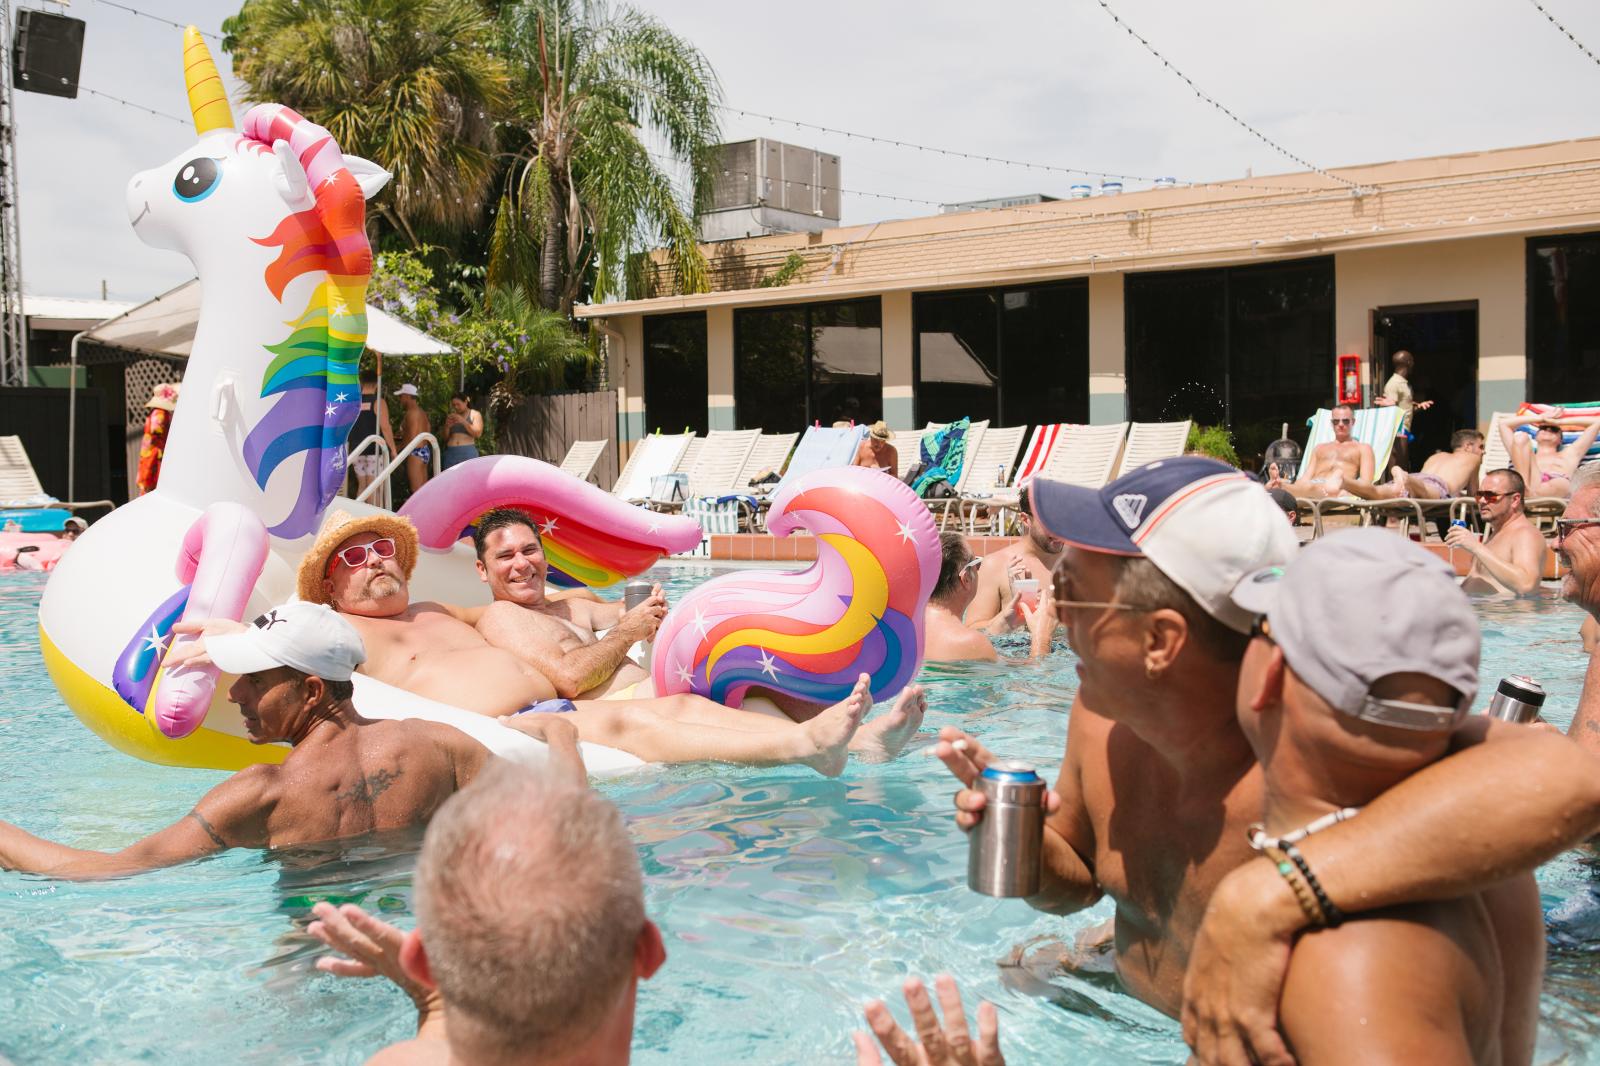 Men hang out at the pool during a party at Parliament House in Orlando, Florida. Parliament House is Orlando's iconic 44-year-old LGBTQ resort that includes several bars, hotel rooms, pool, nightclub and restaurant.